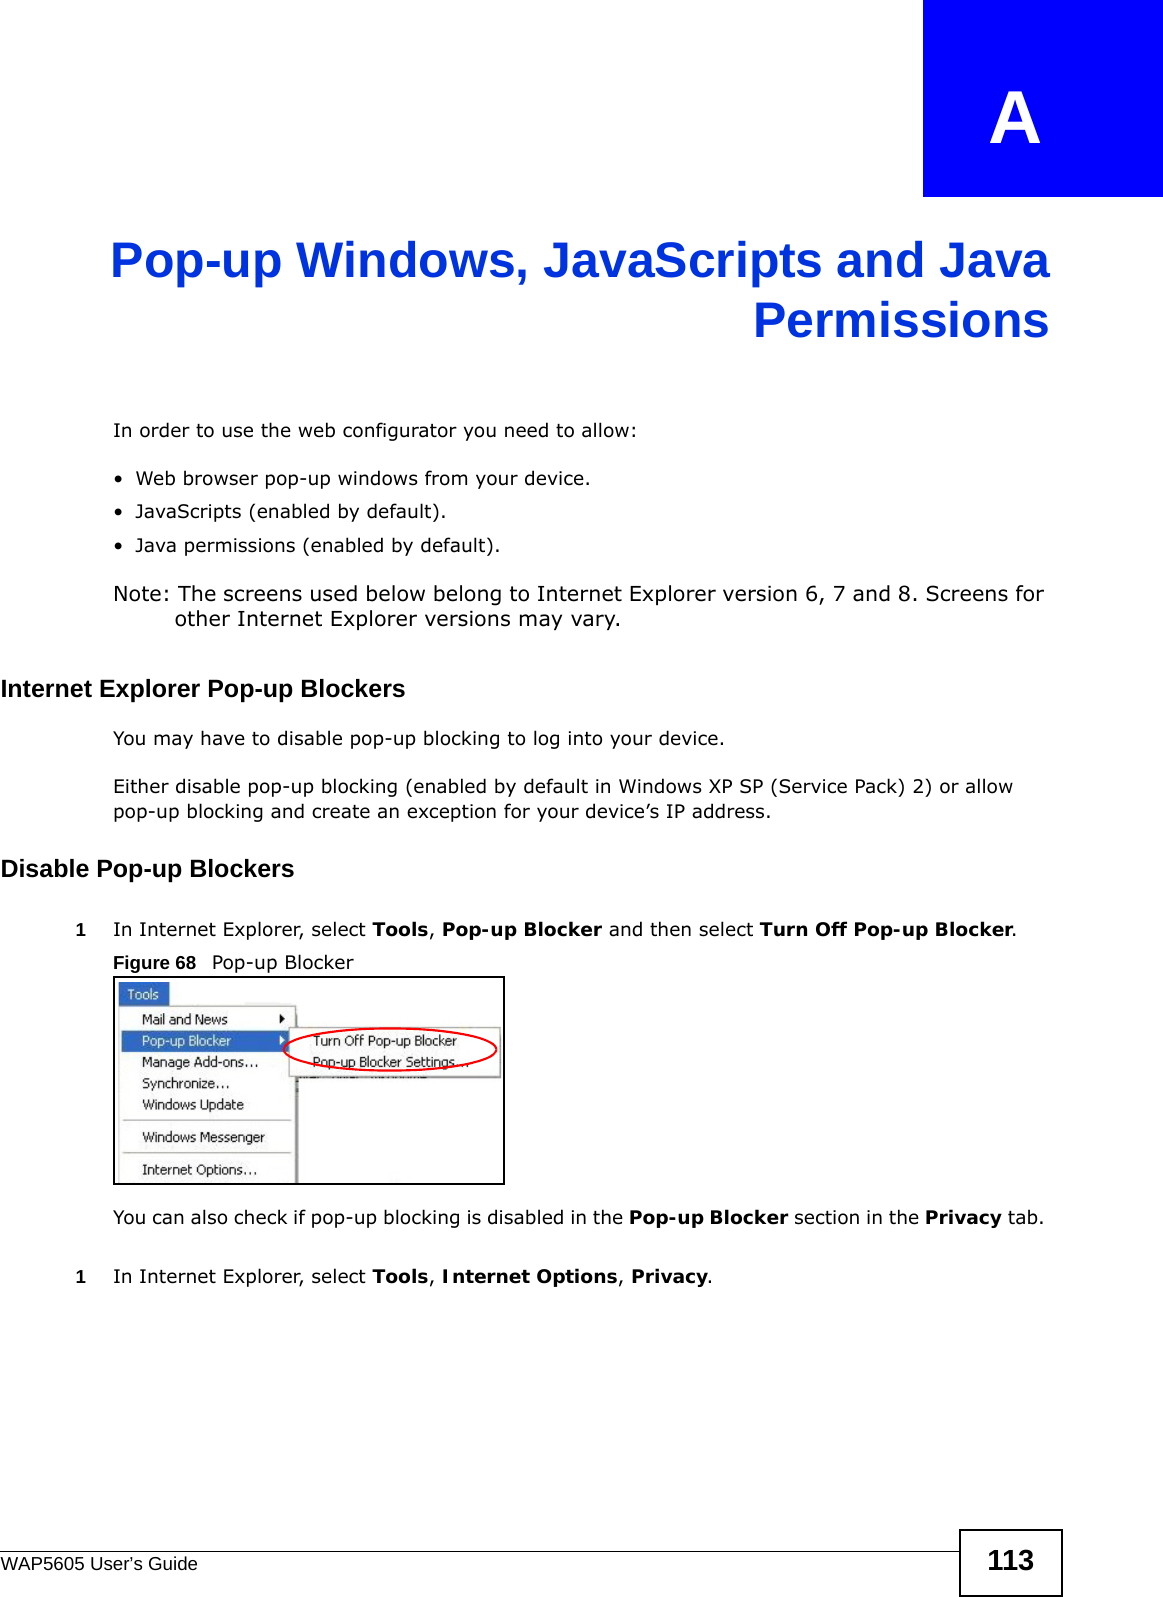 WAP5605 User’s Guide 113APPENDIX   APop-up Windows, JavaScripts and JavaPermissionsIn order to use the web configurator you need to allow:• Web browser pop-up windows from your device.• JavaScripts (enabled by default).• Java permissions (enabled by default).Note: The screens used below belong to Internet Explorer version 6, 7 and 8. Screens for other Internet Explorer versions may vary.Internet Explorer Pop-up BlockersYou may have to disable pop-up blocking to log into your device. Either disable pop-up blocking (enabled by default in Windows XP SP (Service Pack) 2) or allow pop-up blocking and create an exception for your device’s IP address.Disable Pop-up Blockers1In Internet Explorer, select Tools, Pop-up Blocker and then select Turn Off Pop-up Blocker. Figure 68   Pop-up BlockerYou can also check if pop-up blocking is disabled in the Pop-up Blocker section in the Privacy tab. 1In Internet Explorer, select Tools, Internet Options, Privacy.